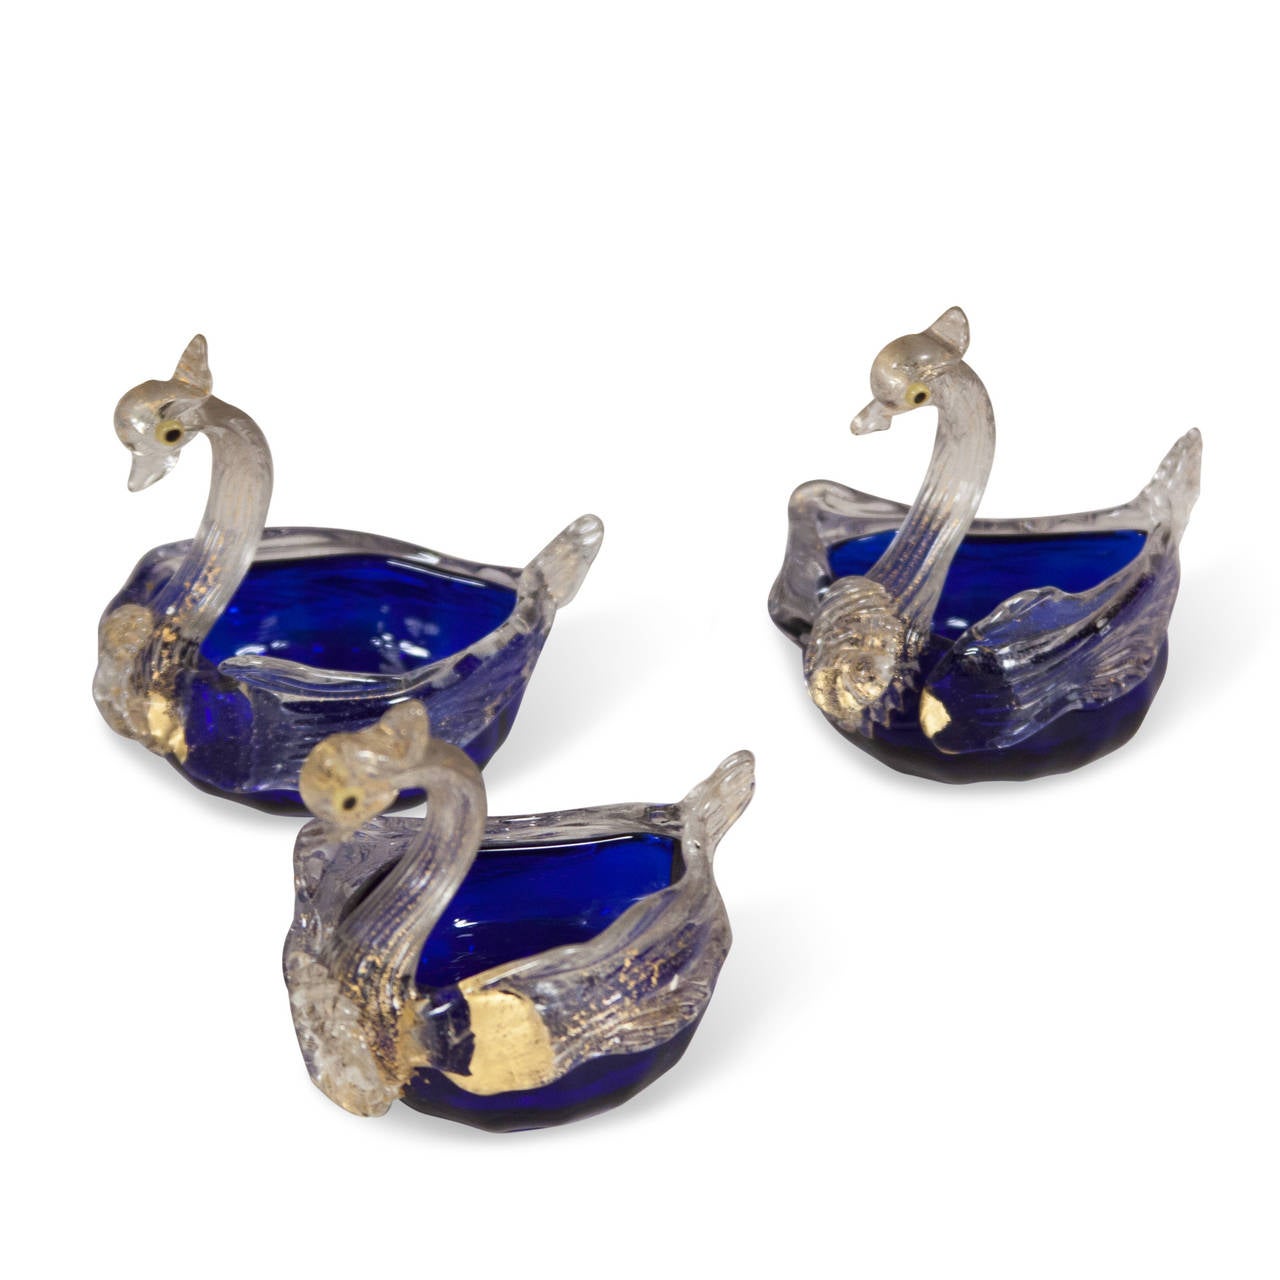 Set of three handblown glass swans, in clear and blue with gold inclusions, Murano, Italy, 1960s. Height 3 in, length 4 in, width 2 1/2 in.